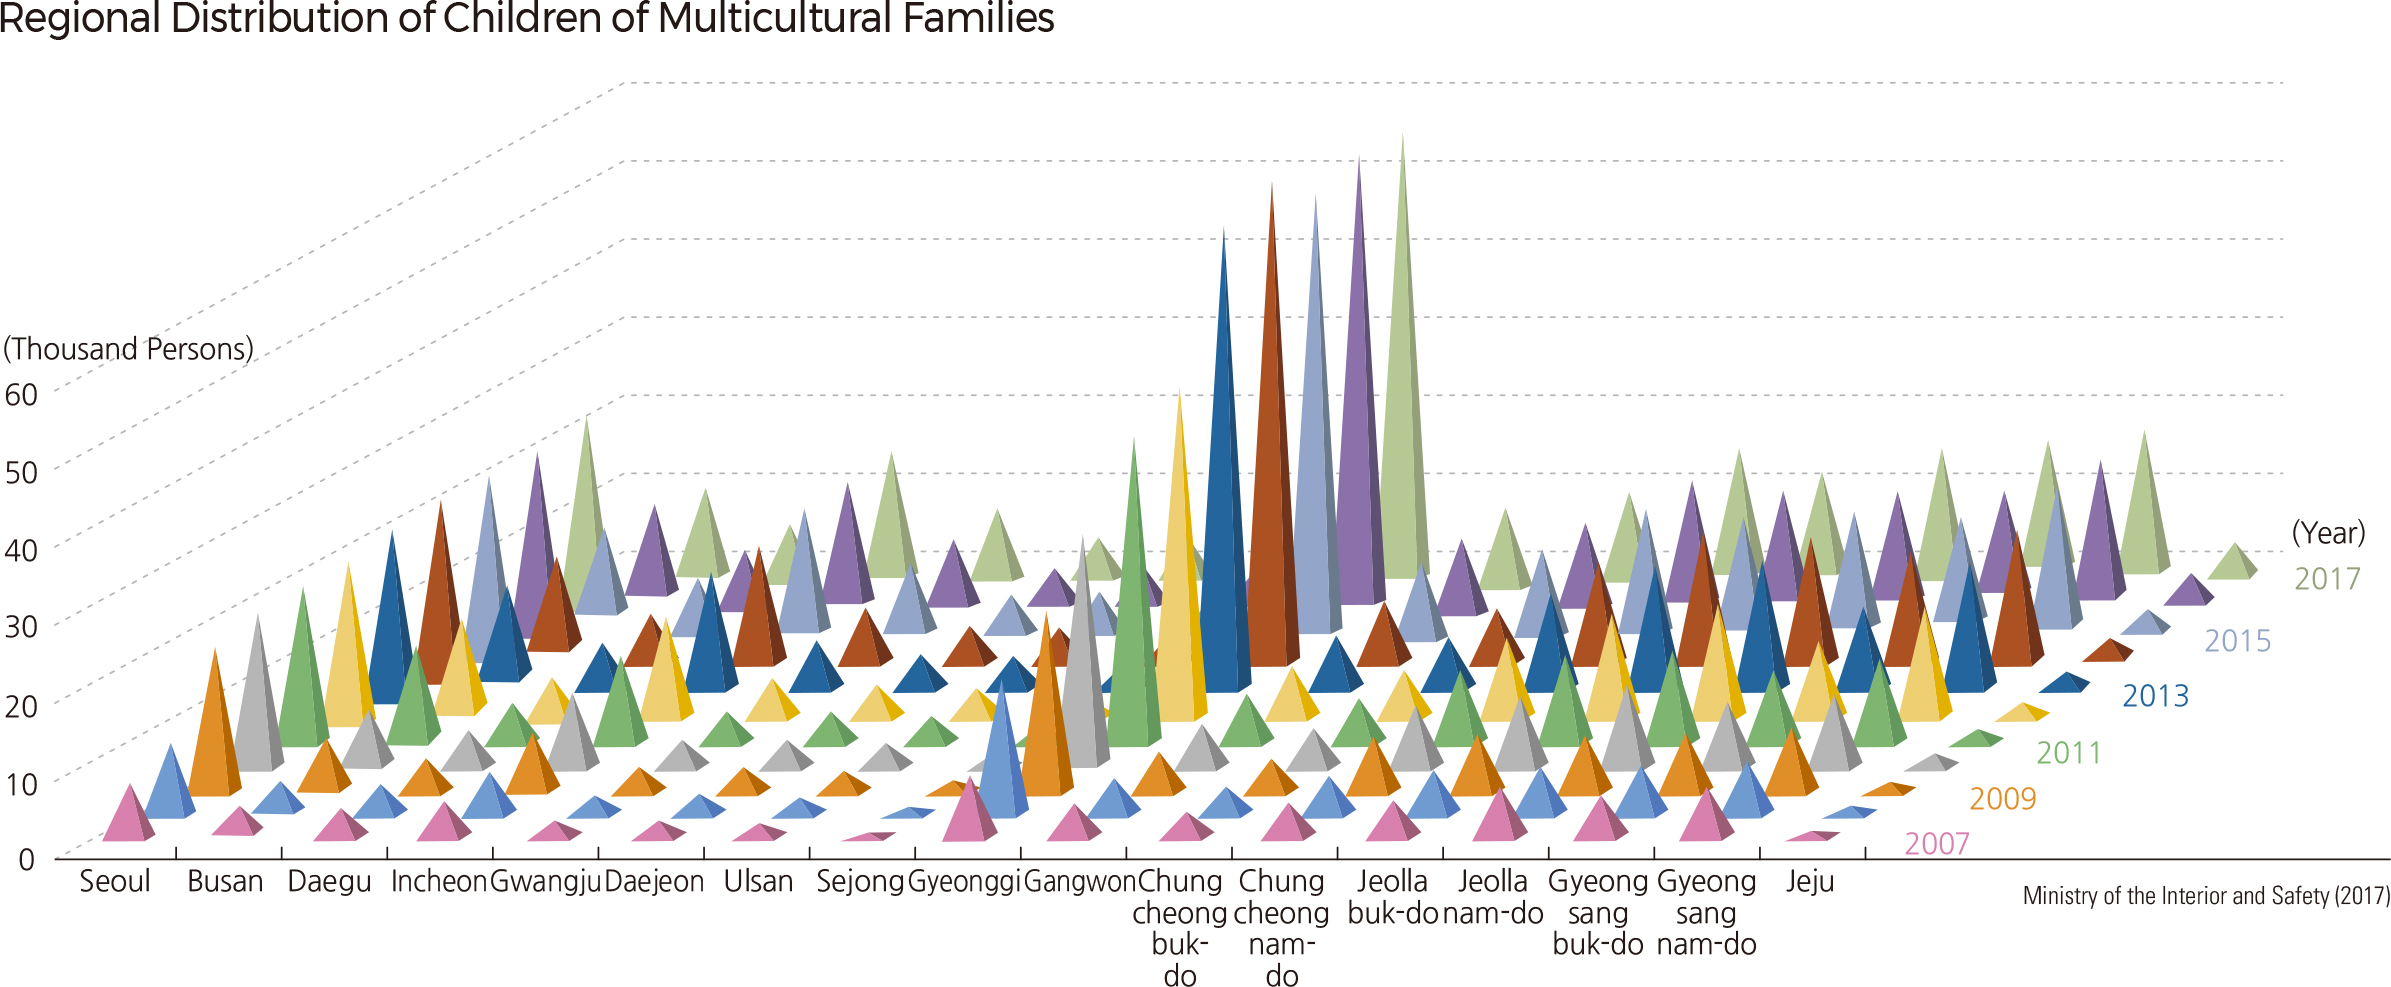 Regional Distribution of Children of Multicultural Families